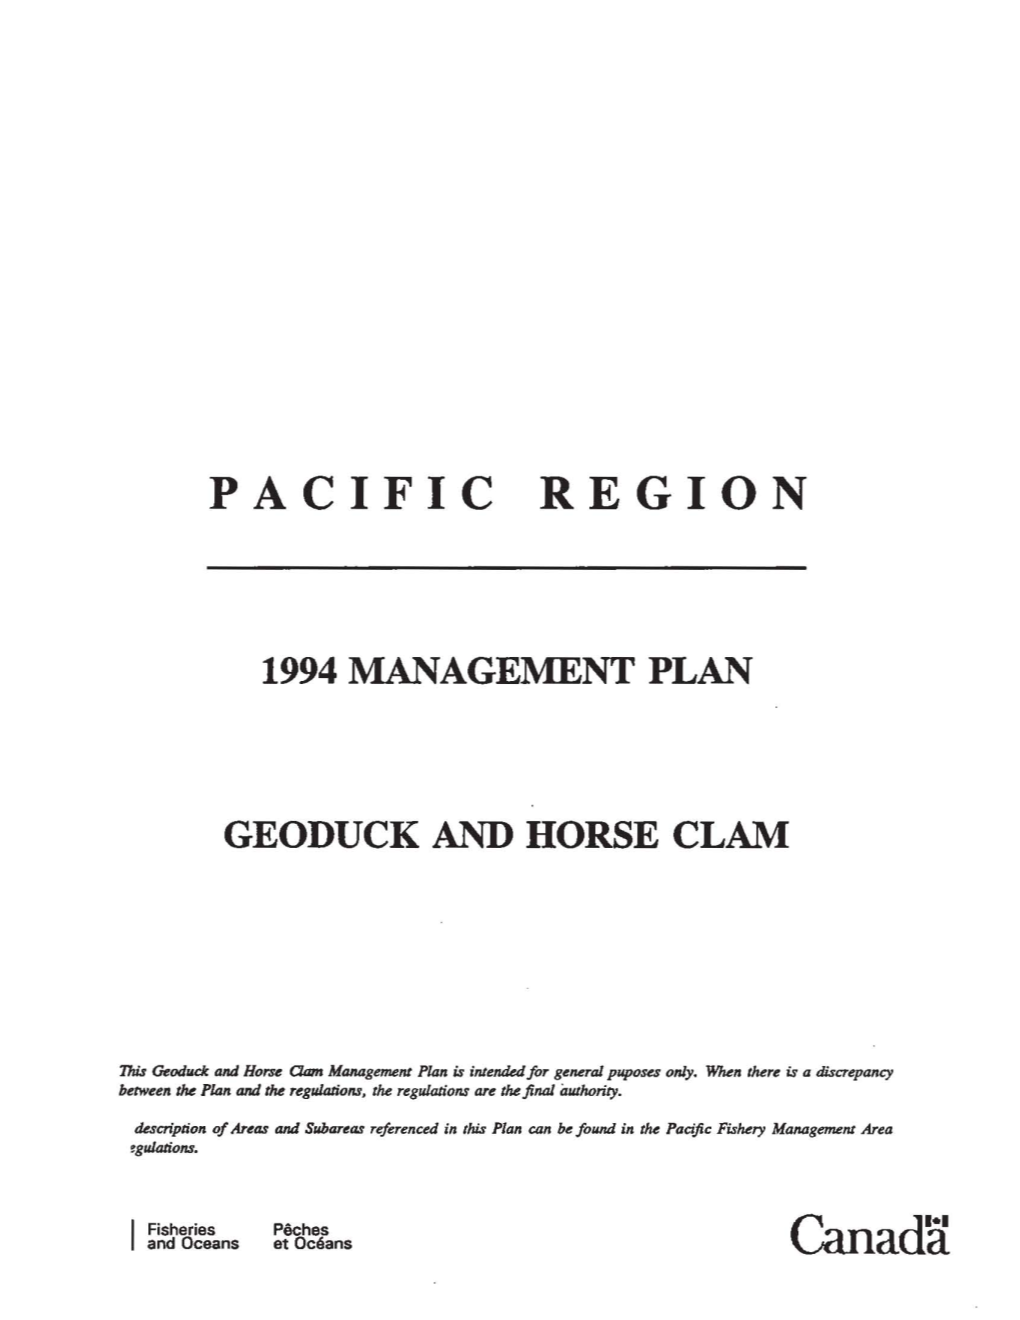 Pacific Region 1994 Management Plan Geoduck and Horse Clam